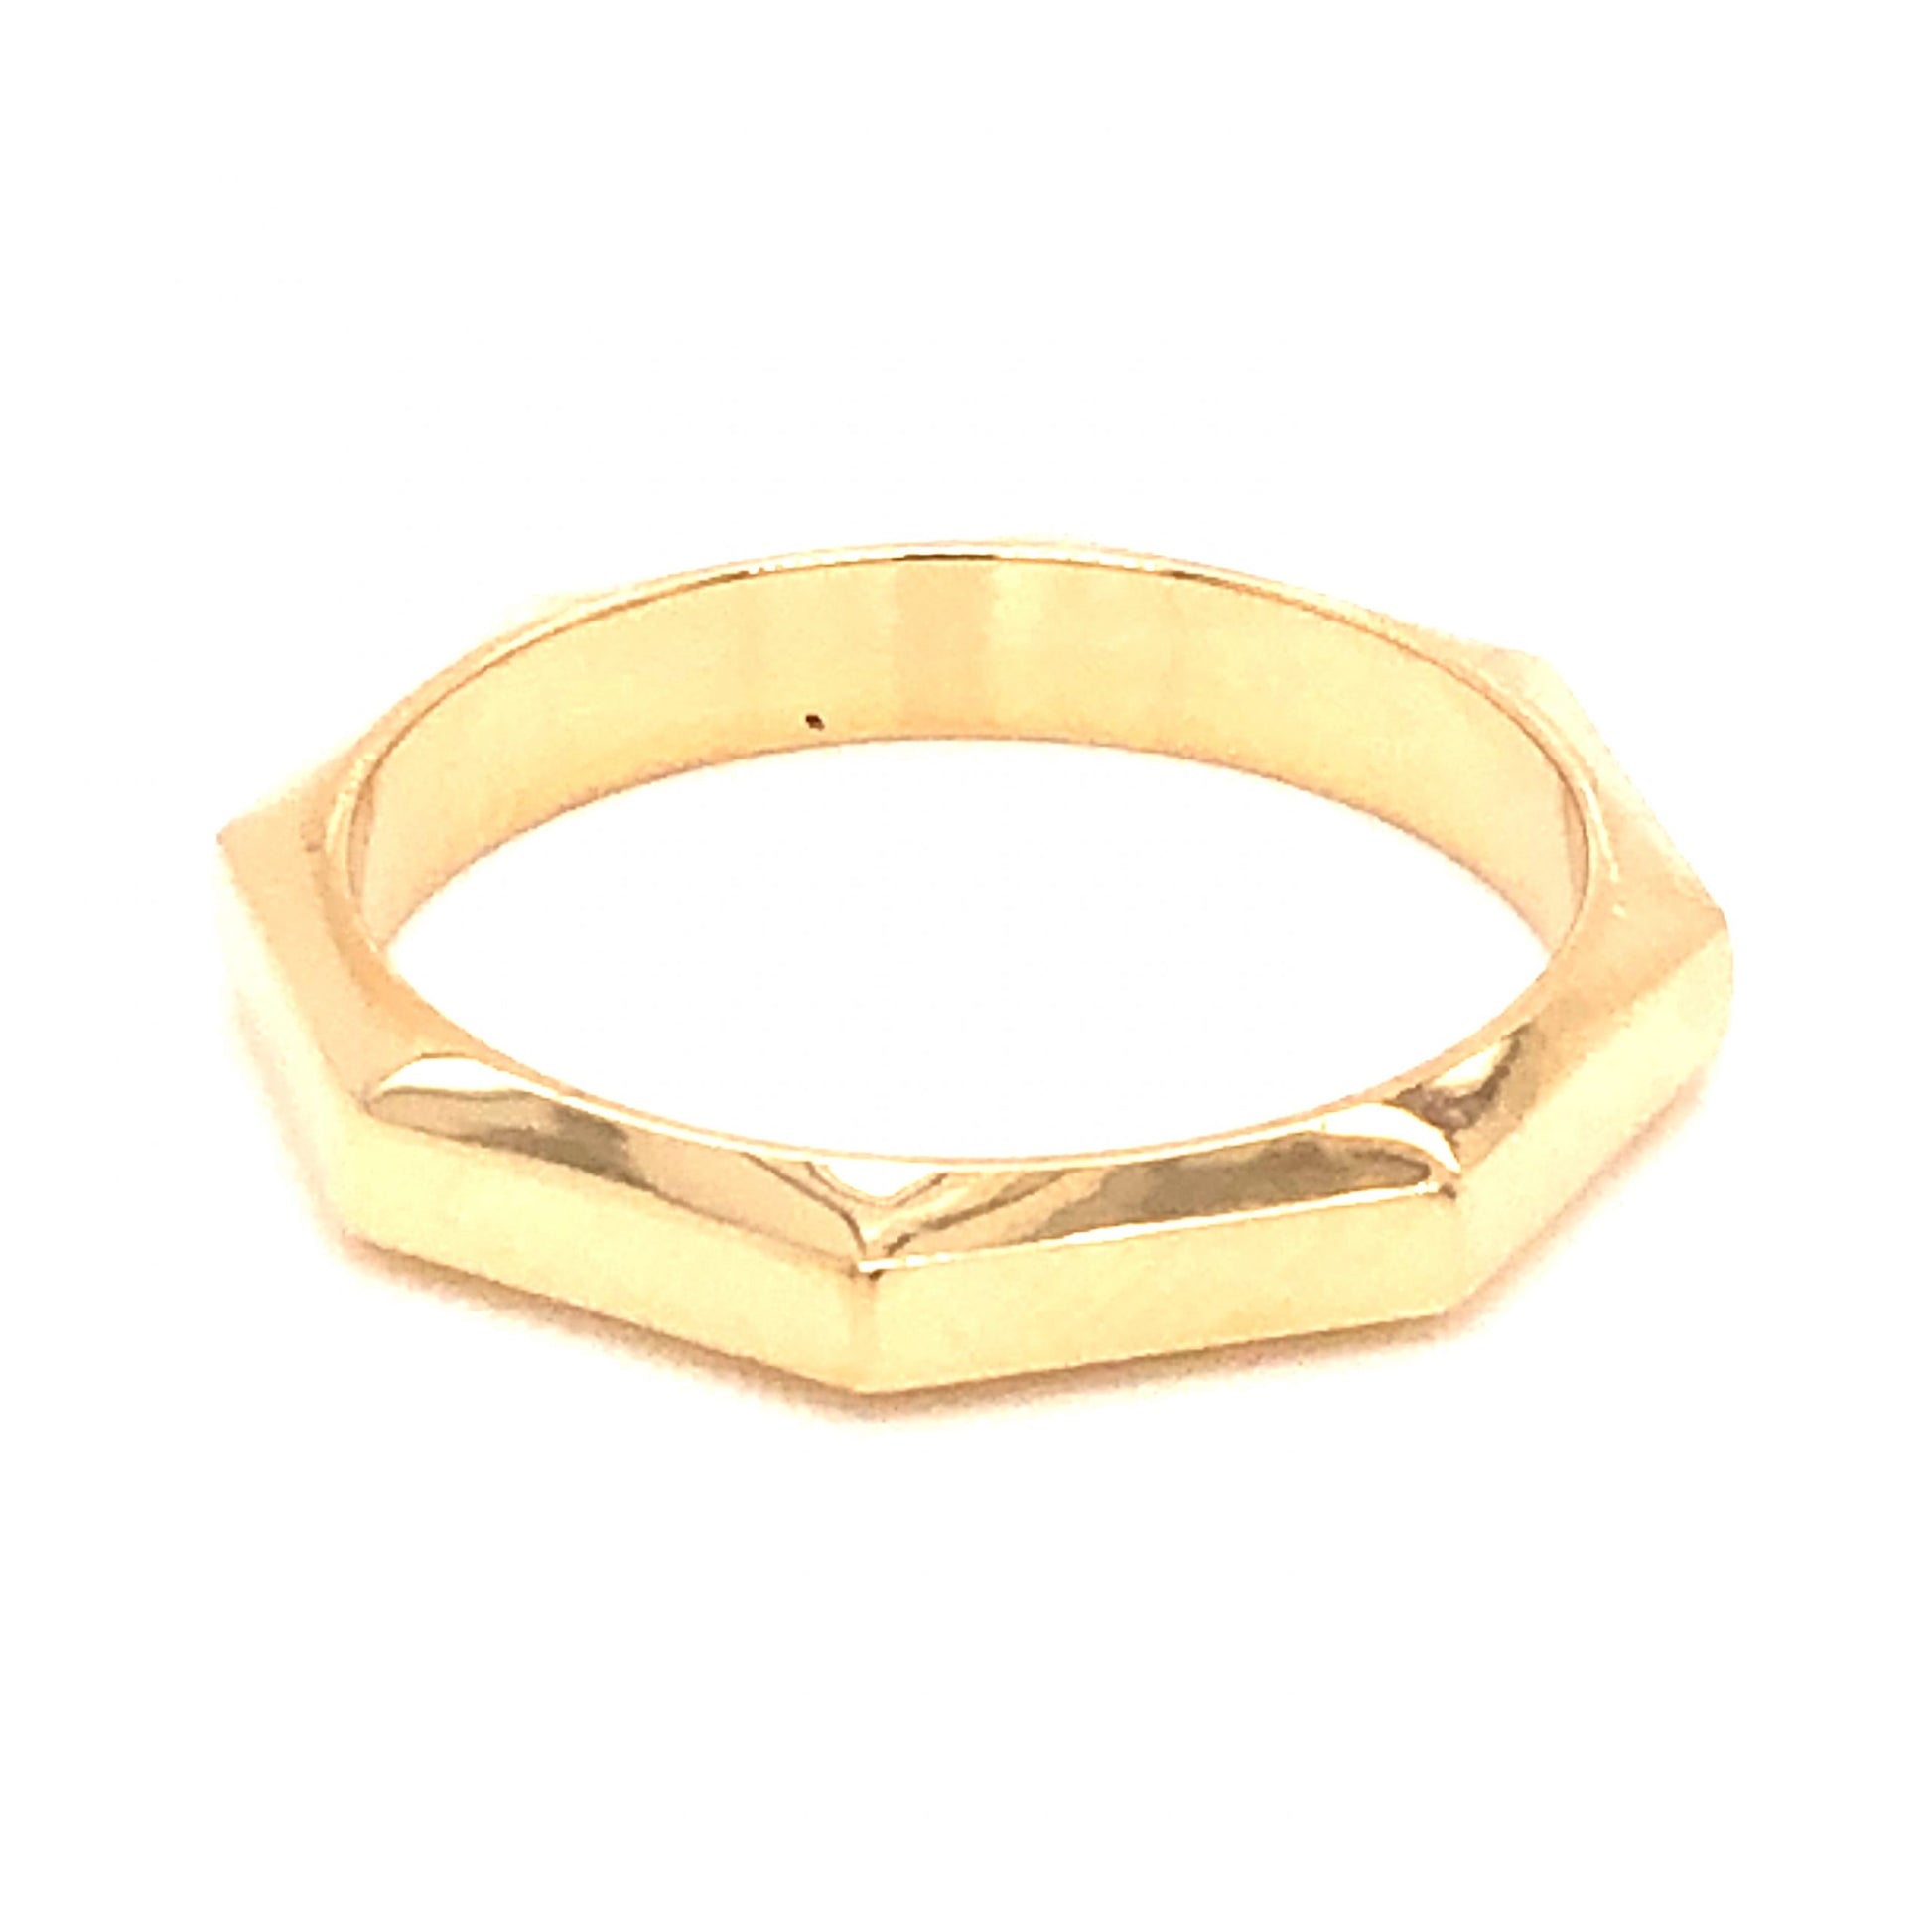 3mm Octagonal Stacking Band in 14k Yellow GoldComposition: Platinum Ring Size: 6.5 Total Gram Weight: 3.3 g Inscription: 14k
      